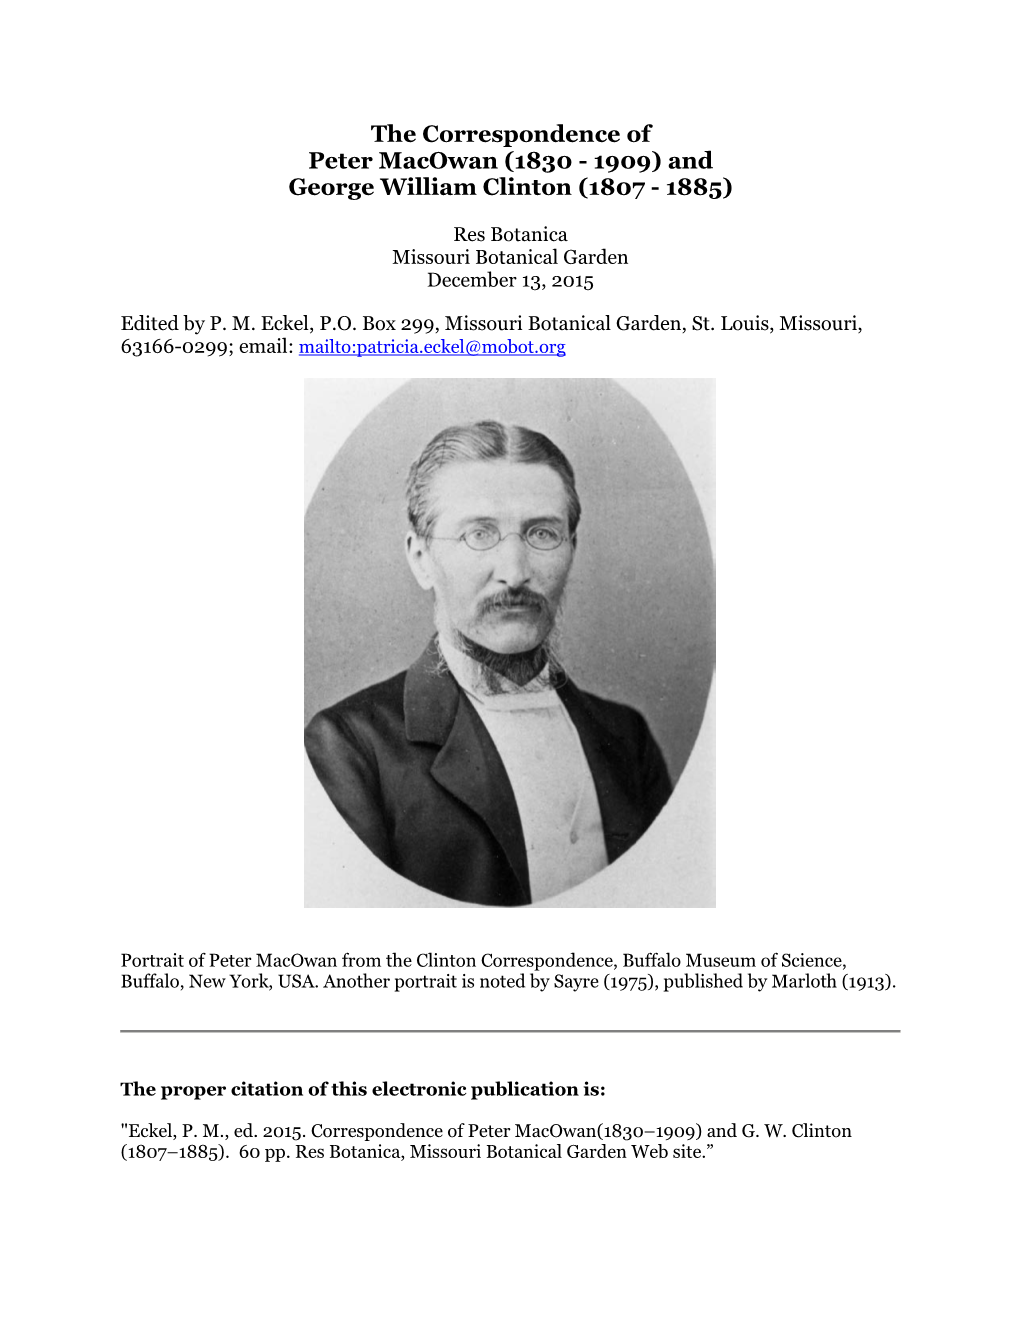 The Correspondence of Peter Macowan (1830 - 1909) and George William Clinton (1807 - 1885)